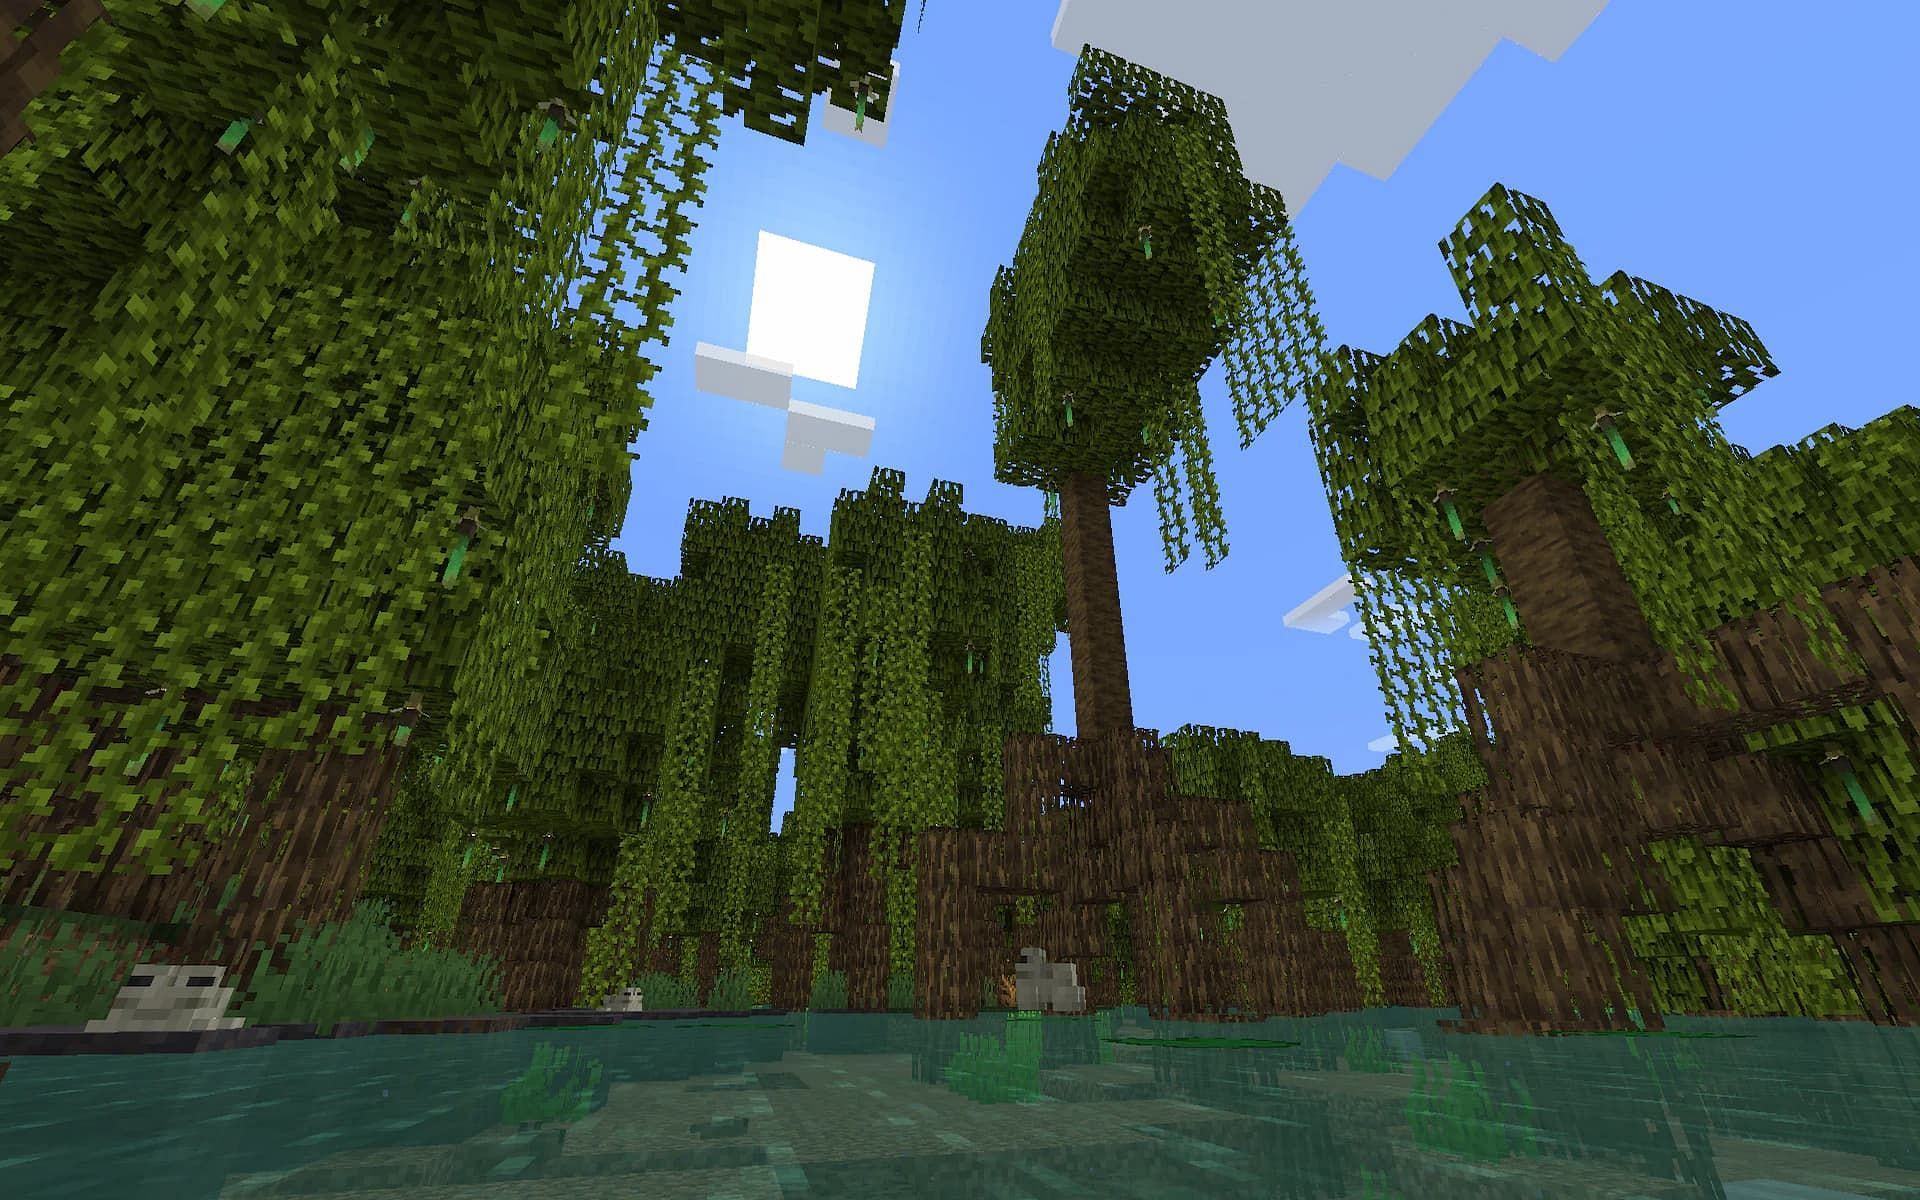 Players can be whoever they want in this wide world of Minecraft (Image via Minecraft.net)